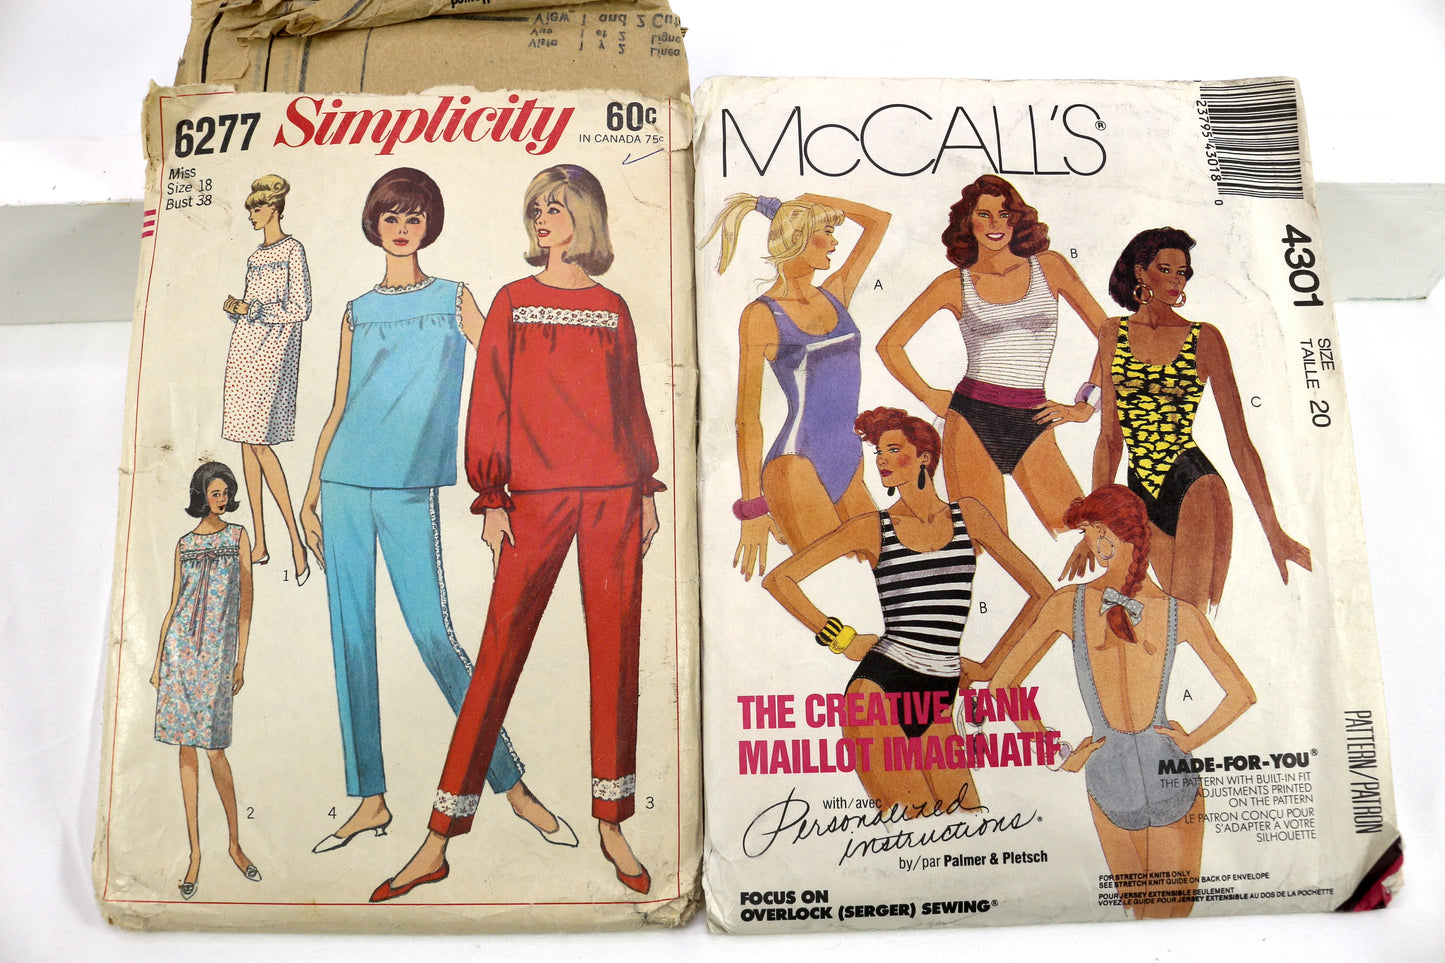 Simplicity 6277 Womens Pajama Sewing Pattern or McCalls 4301 Swimsuit, Leotard Sewing Pattern